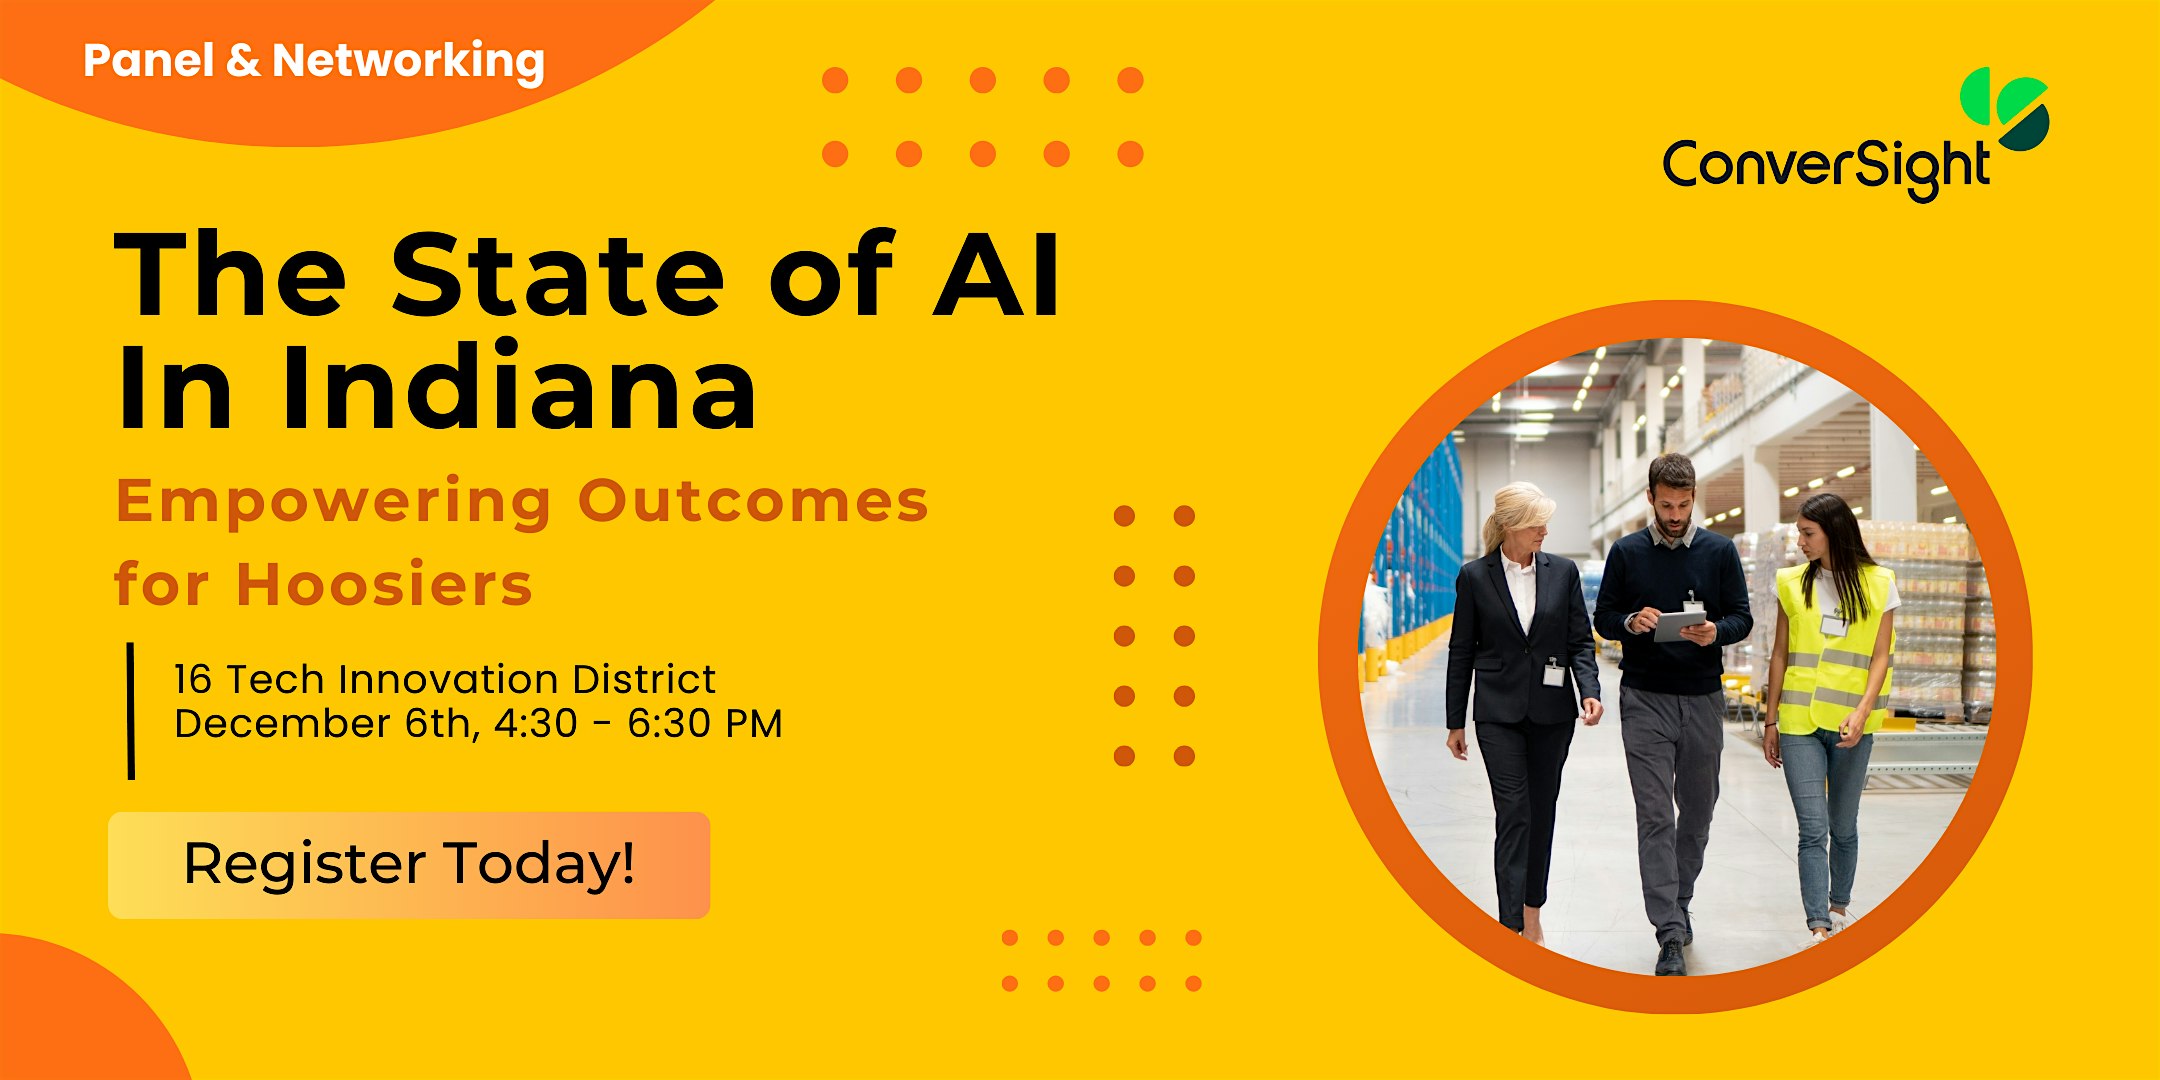 The State of AI in Indiana: Empowering Outcomes for Hoosiers